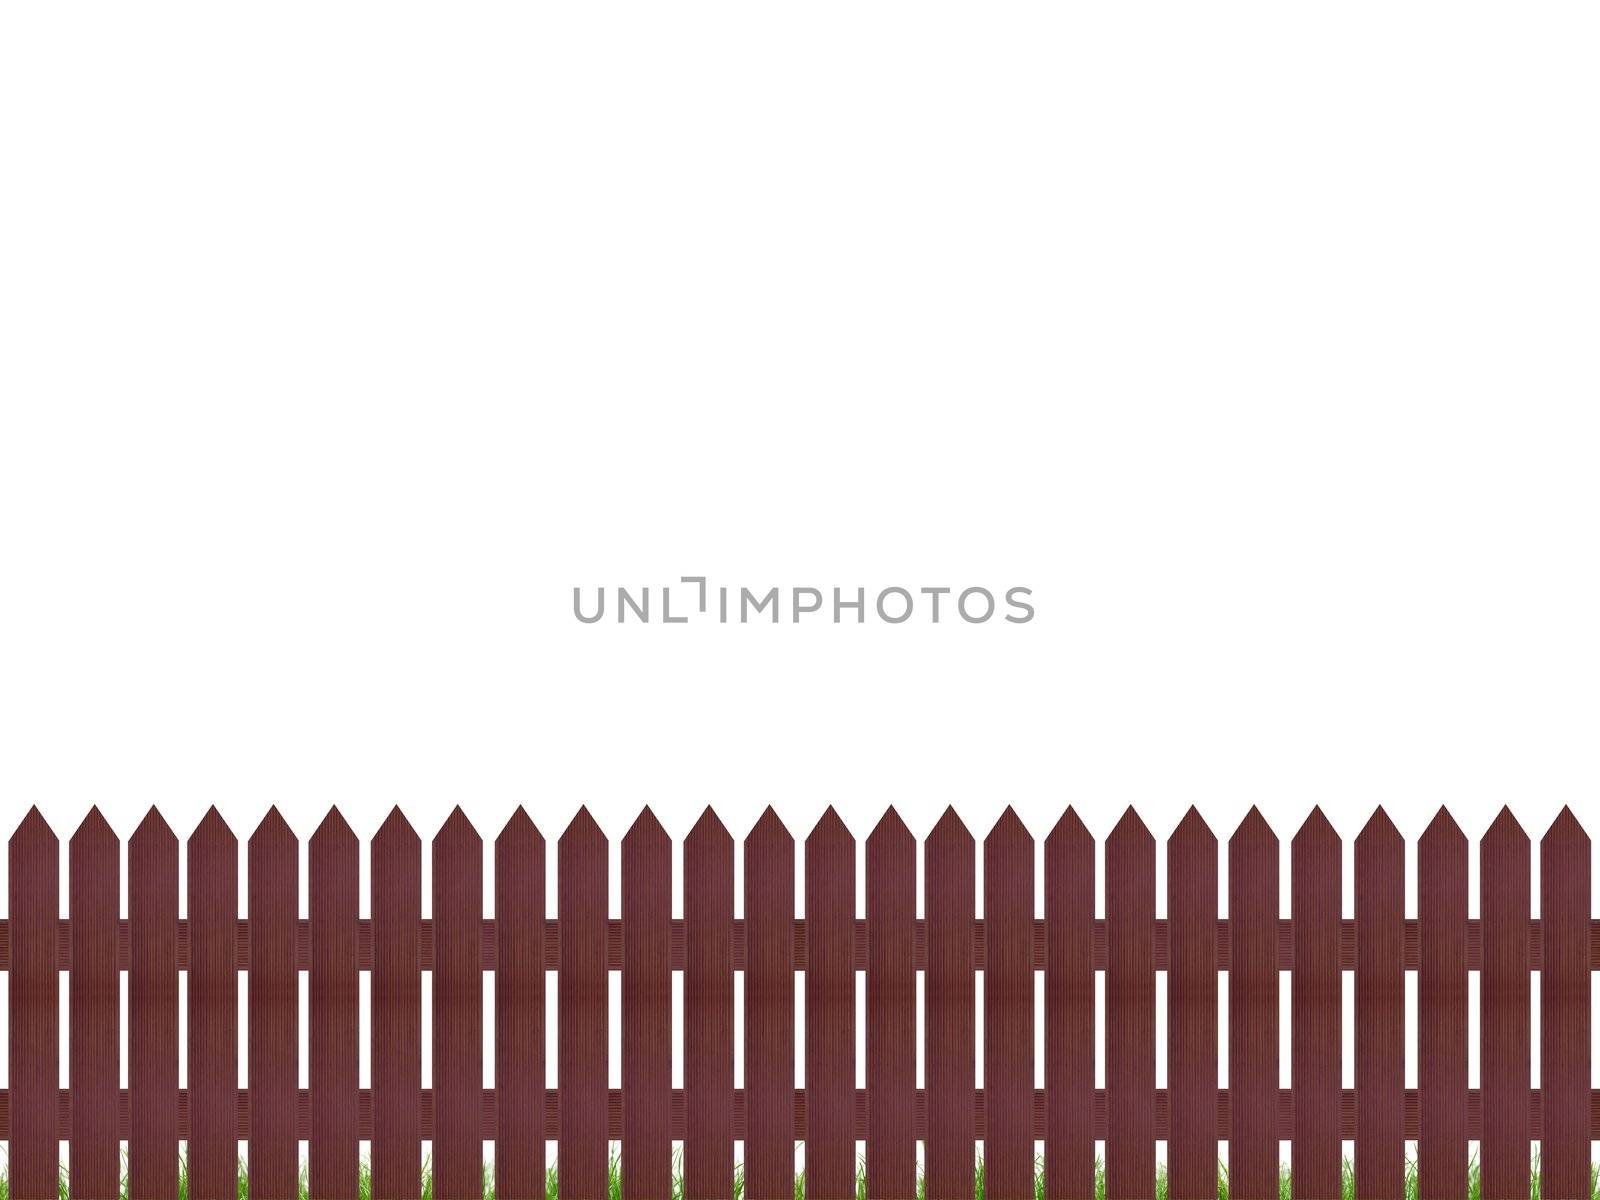 A close up shot of a wooden picket fence